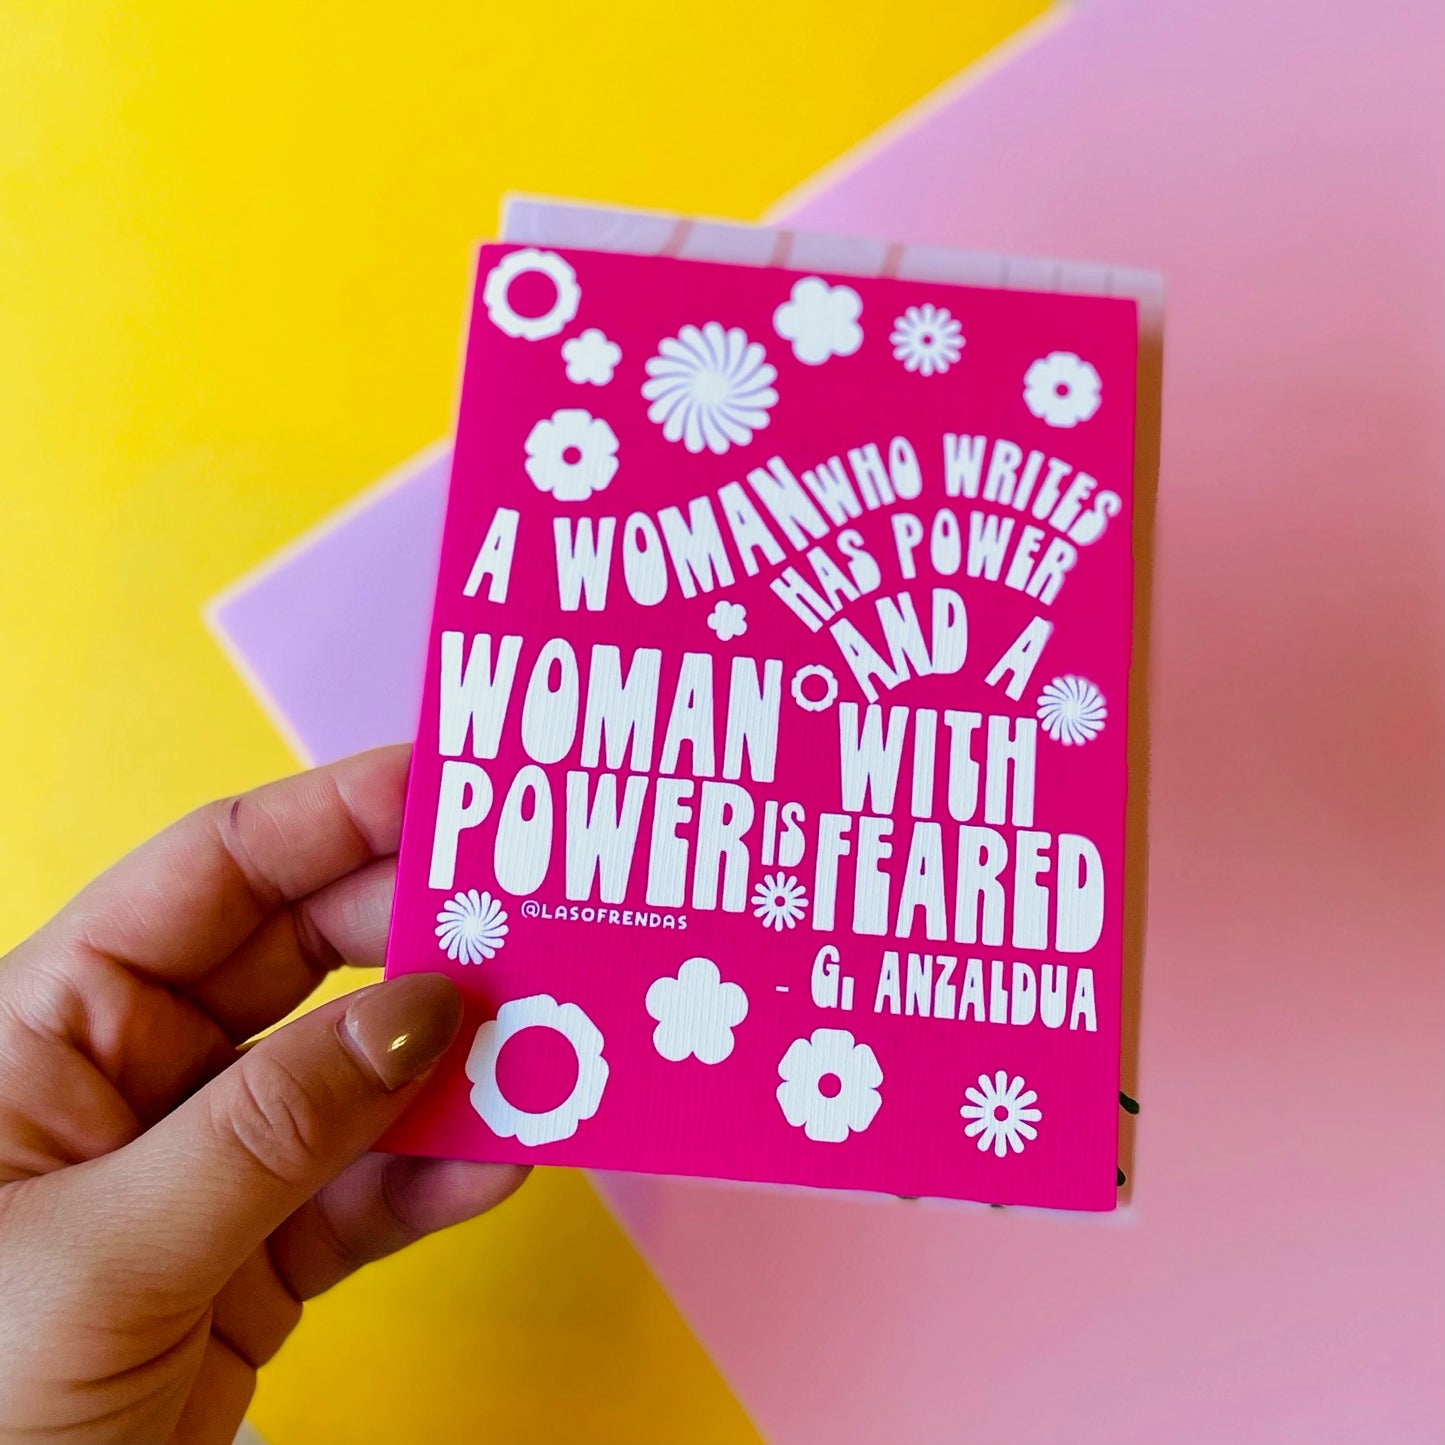 A women who writes has power and a women with power is feared - Gloria Anzaldua Quote Greeting Card - Las Ofrendas 